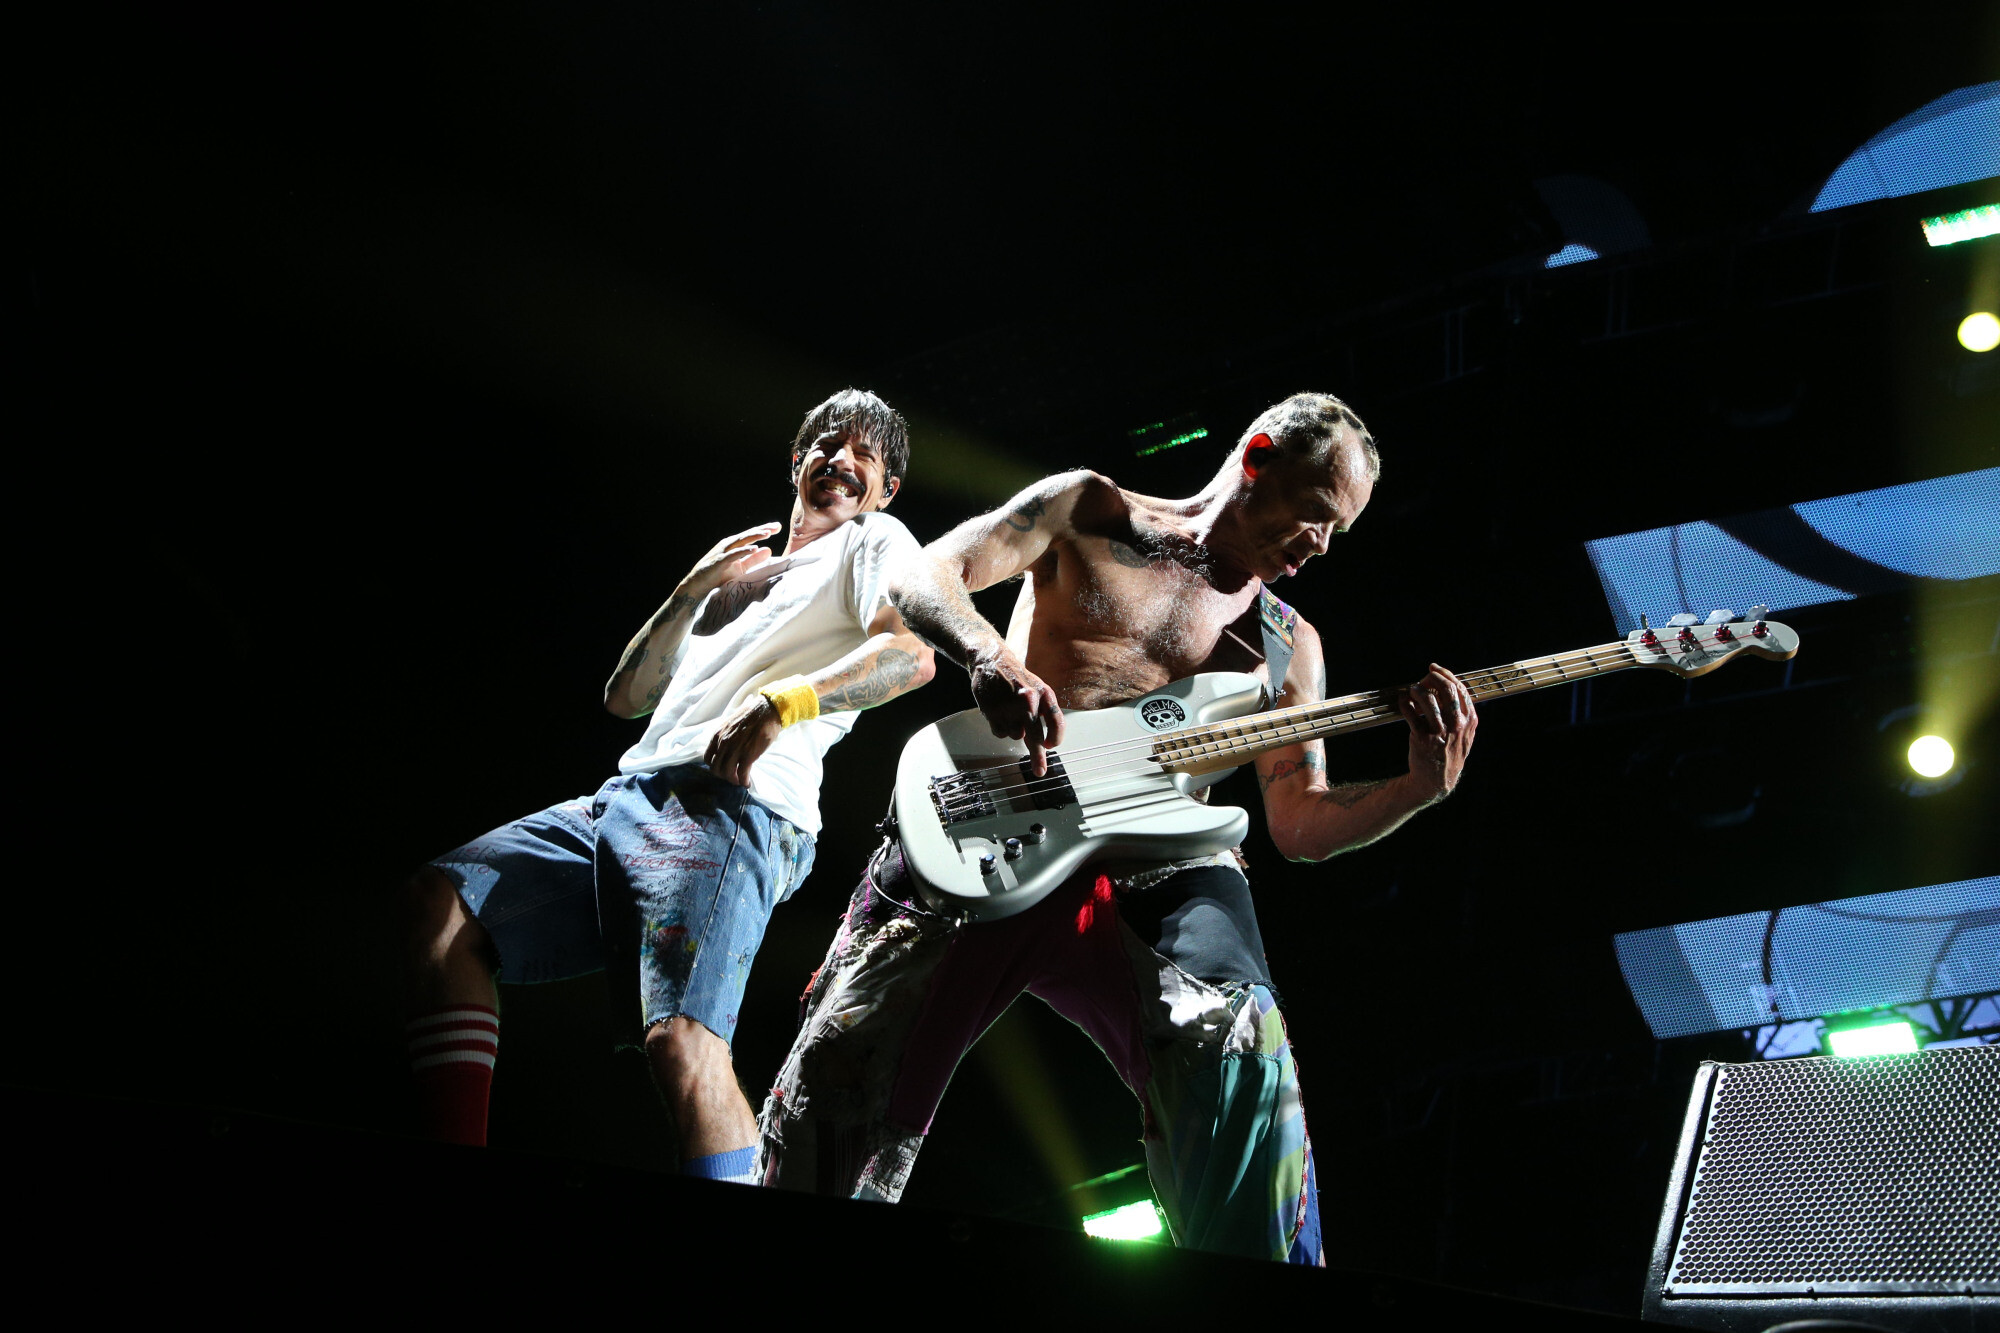 Red Hot Chilli Peppers: RHCP, One of 90's alternative rock-funk bands. 2000x1340 HD Wallpaper.